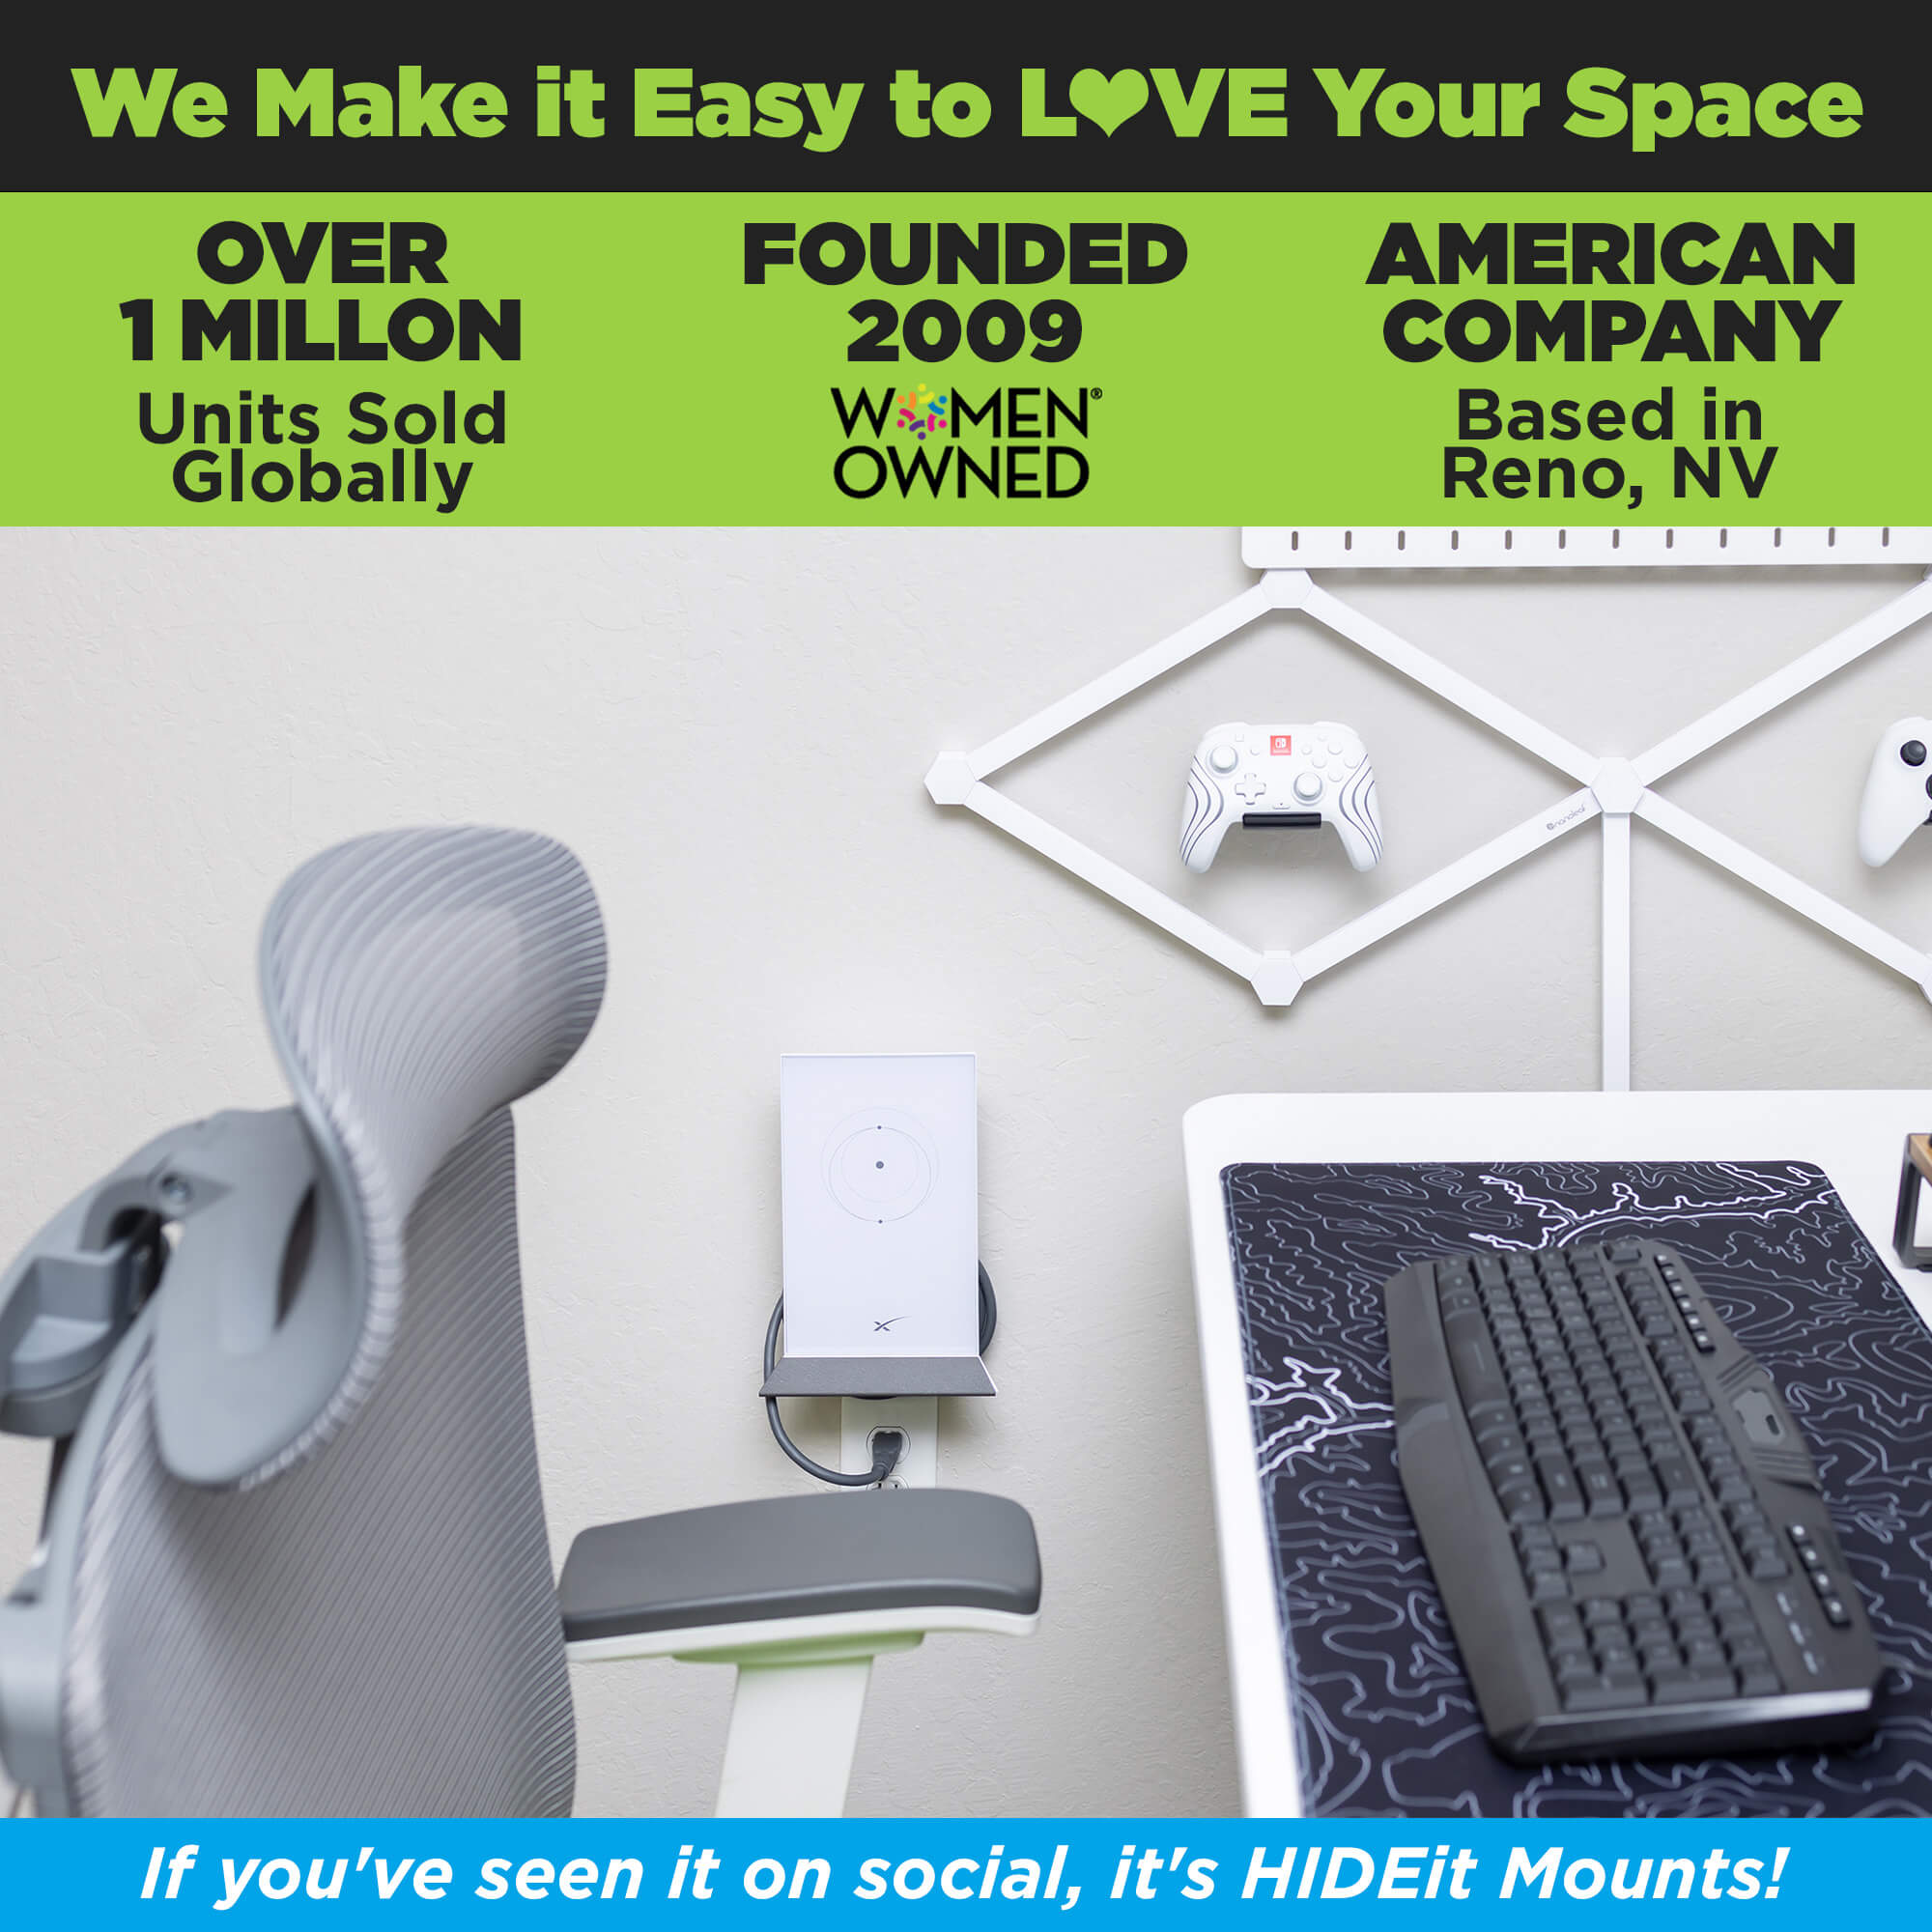 HIDEit Mounts makes it easy to love your space! HIDEit is an American company with over 1 million units sold globally.